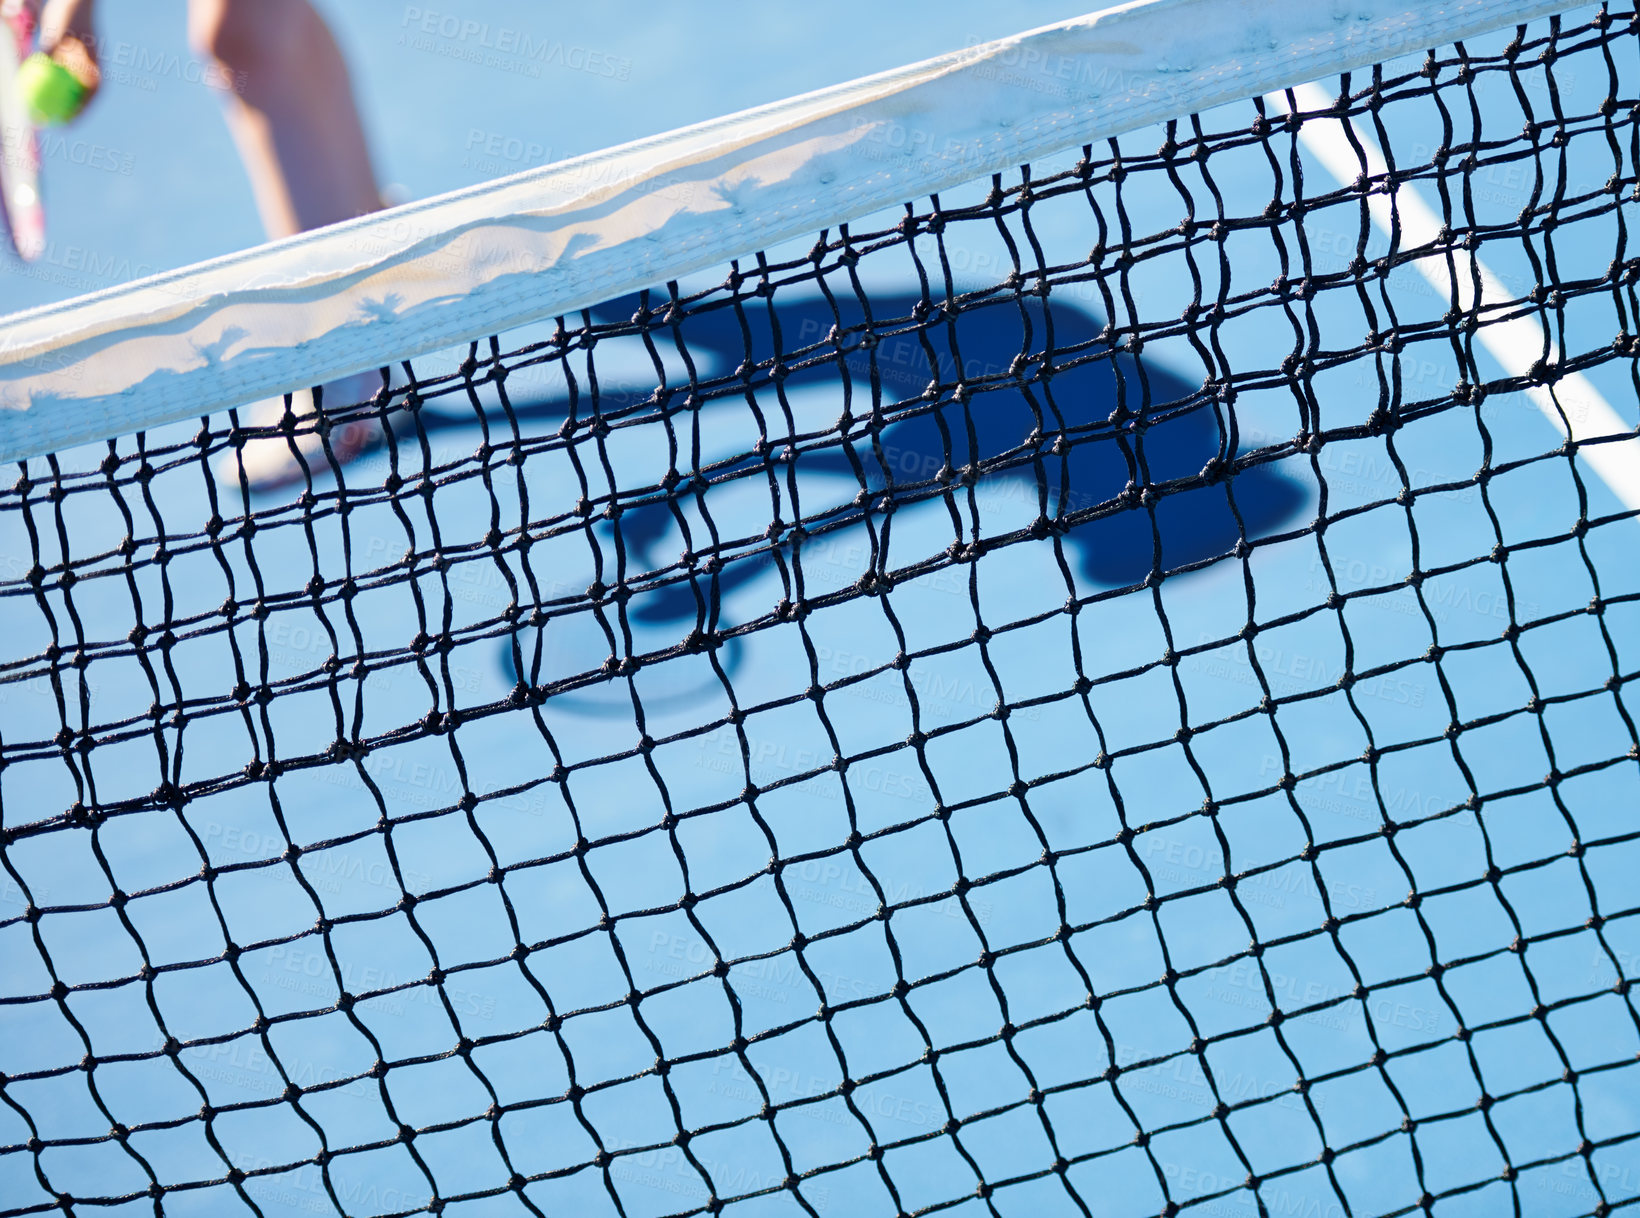 Buy stock photo Tennis court, sports or closeup of net with space for mockup, workout or playing in practice. Outdoor, equipment or athlete in training, arena or fitness exercise at game, contest or competition